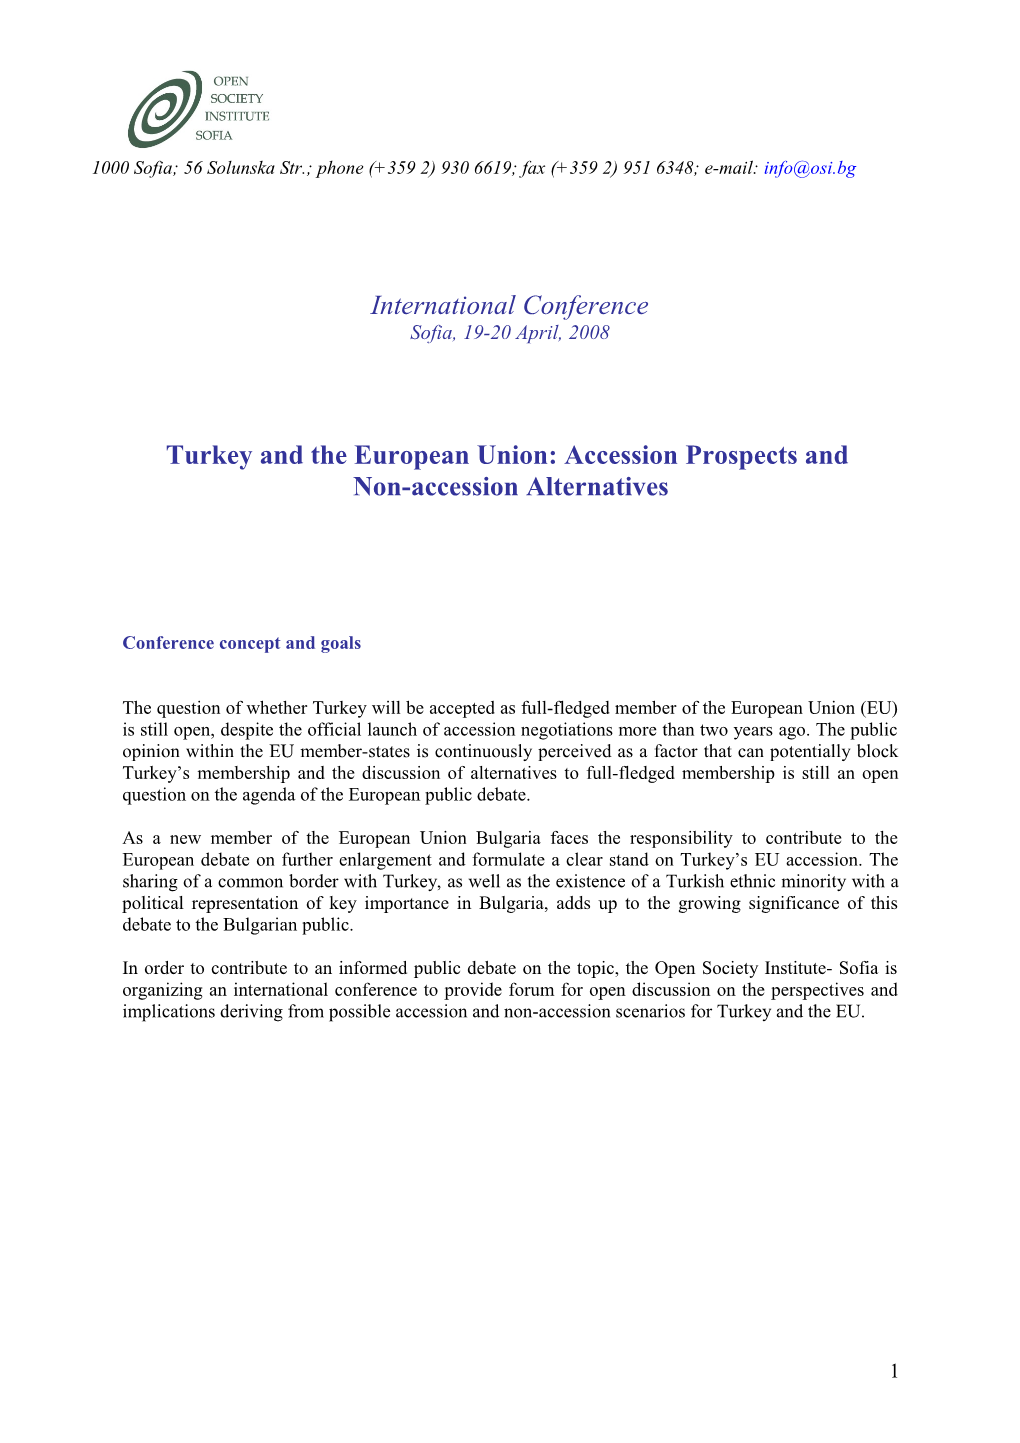 Turkey and the European Union: Accession Prospects And